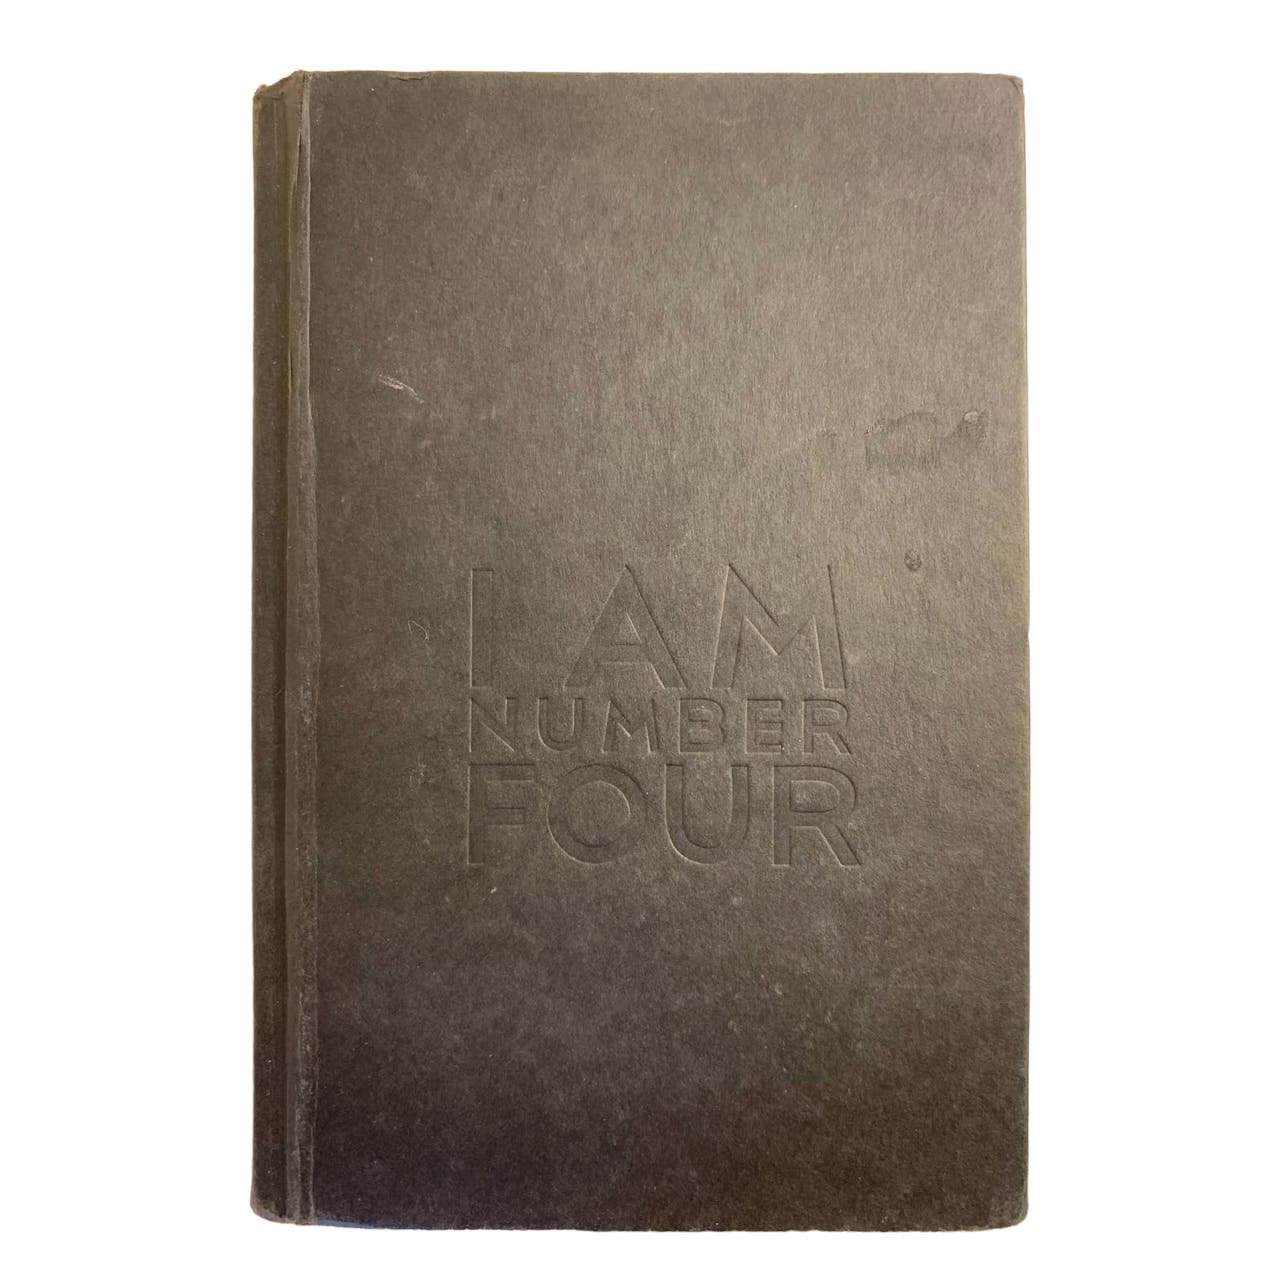 I Am Number Four (Lorien Legacies, Book 1) Hardcover by